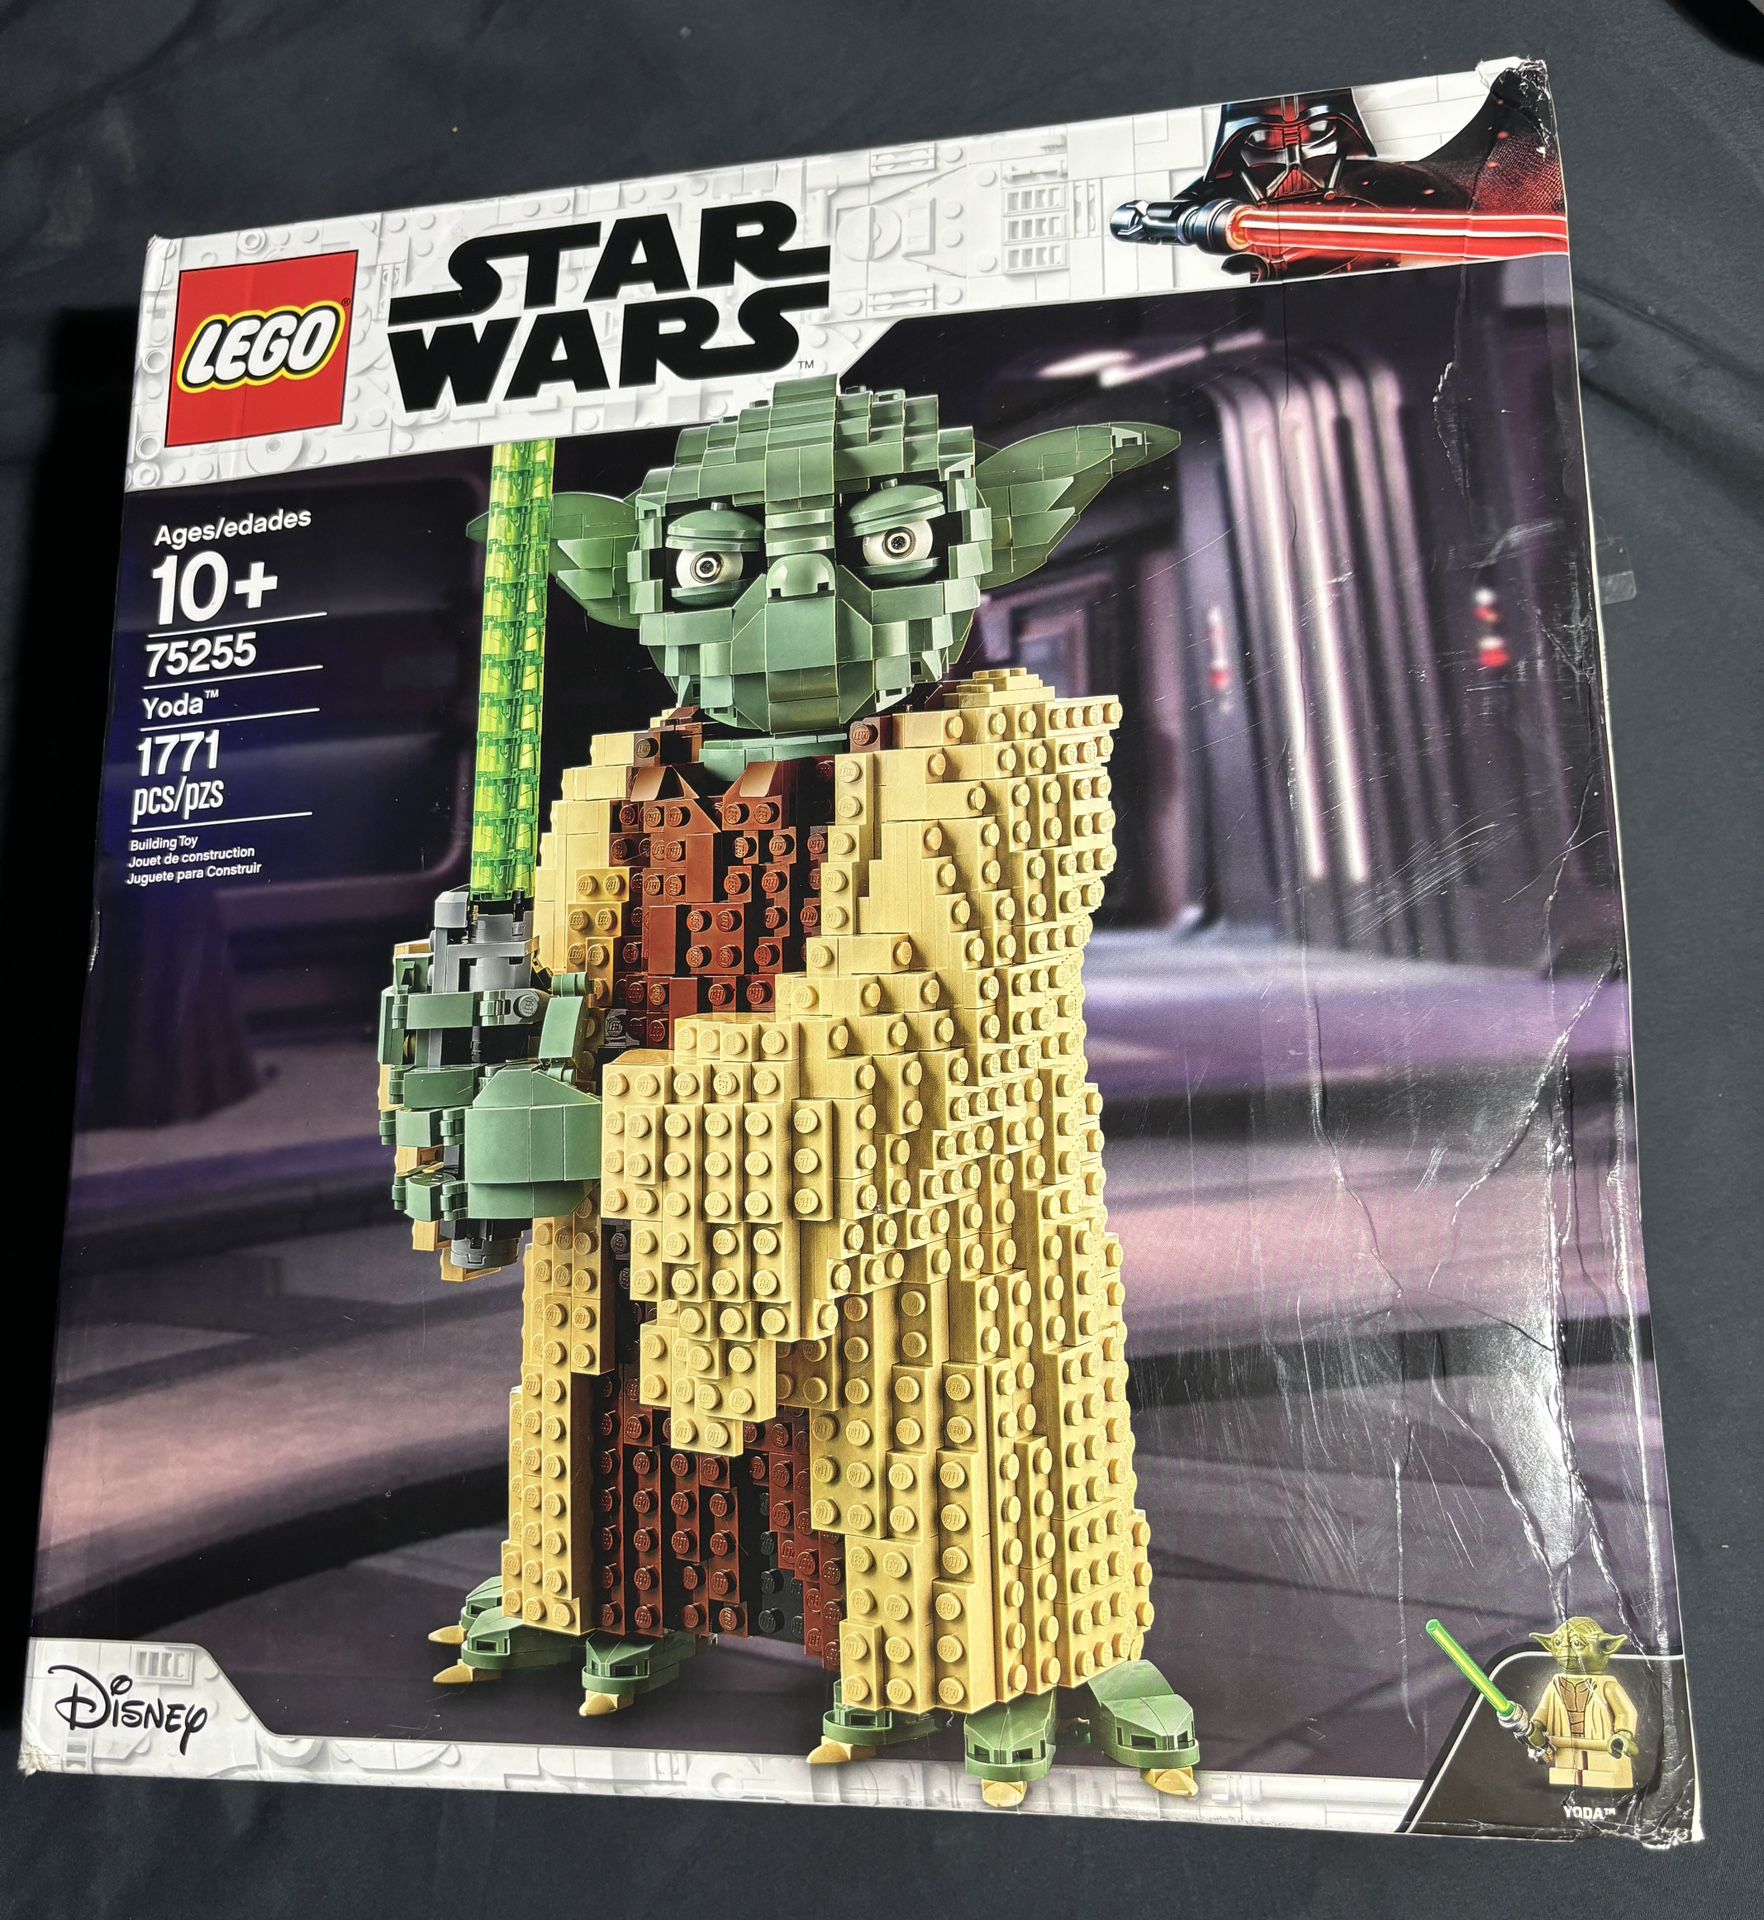 Star Wars Lego Yoda 75255 Sealed Brand New 1771 PCS 2019 Item (contact info removed)